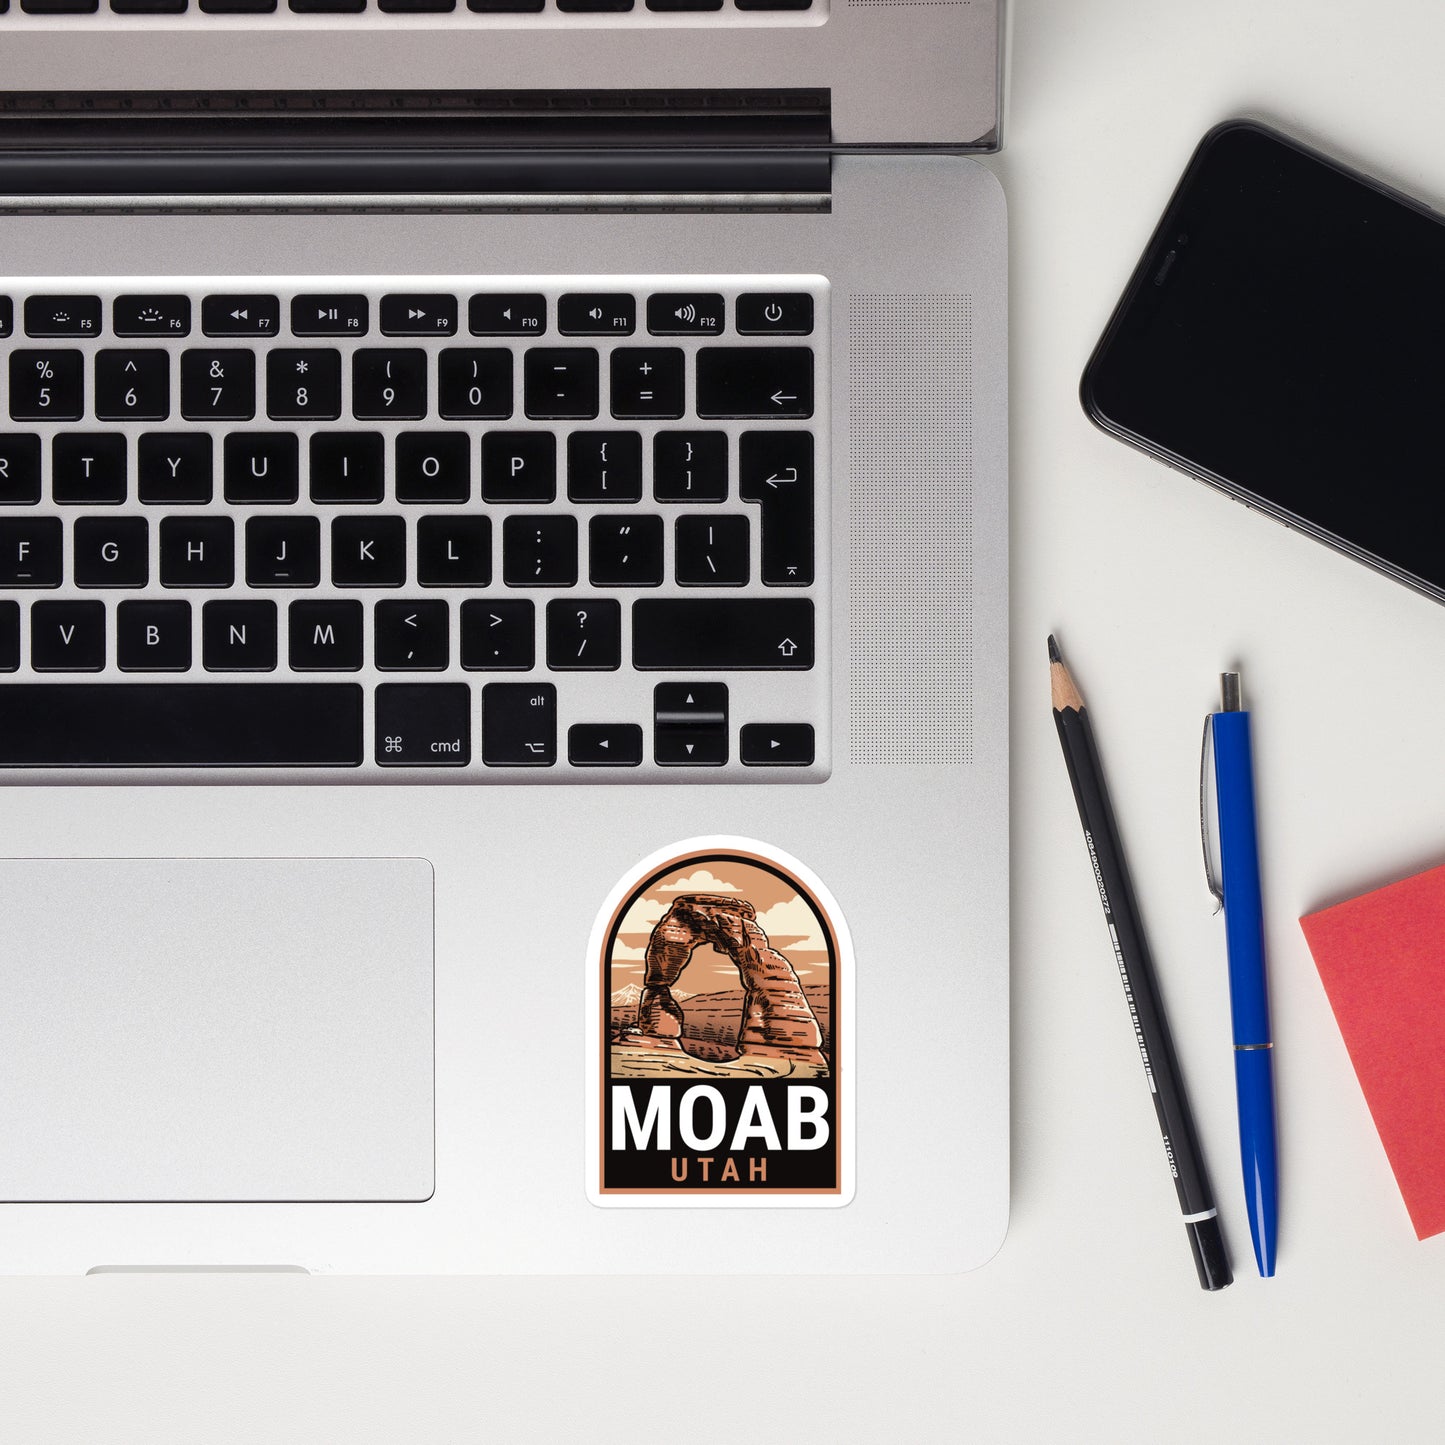 A sticker of Moab Utah on a laptop